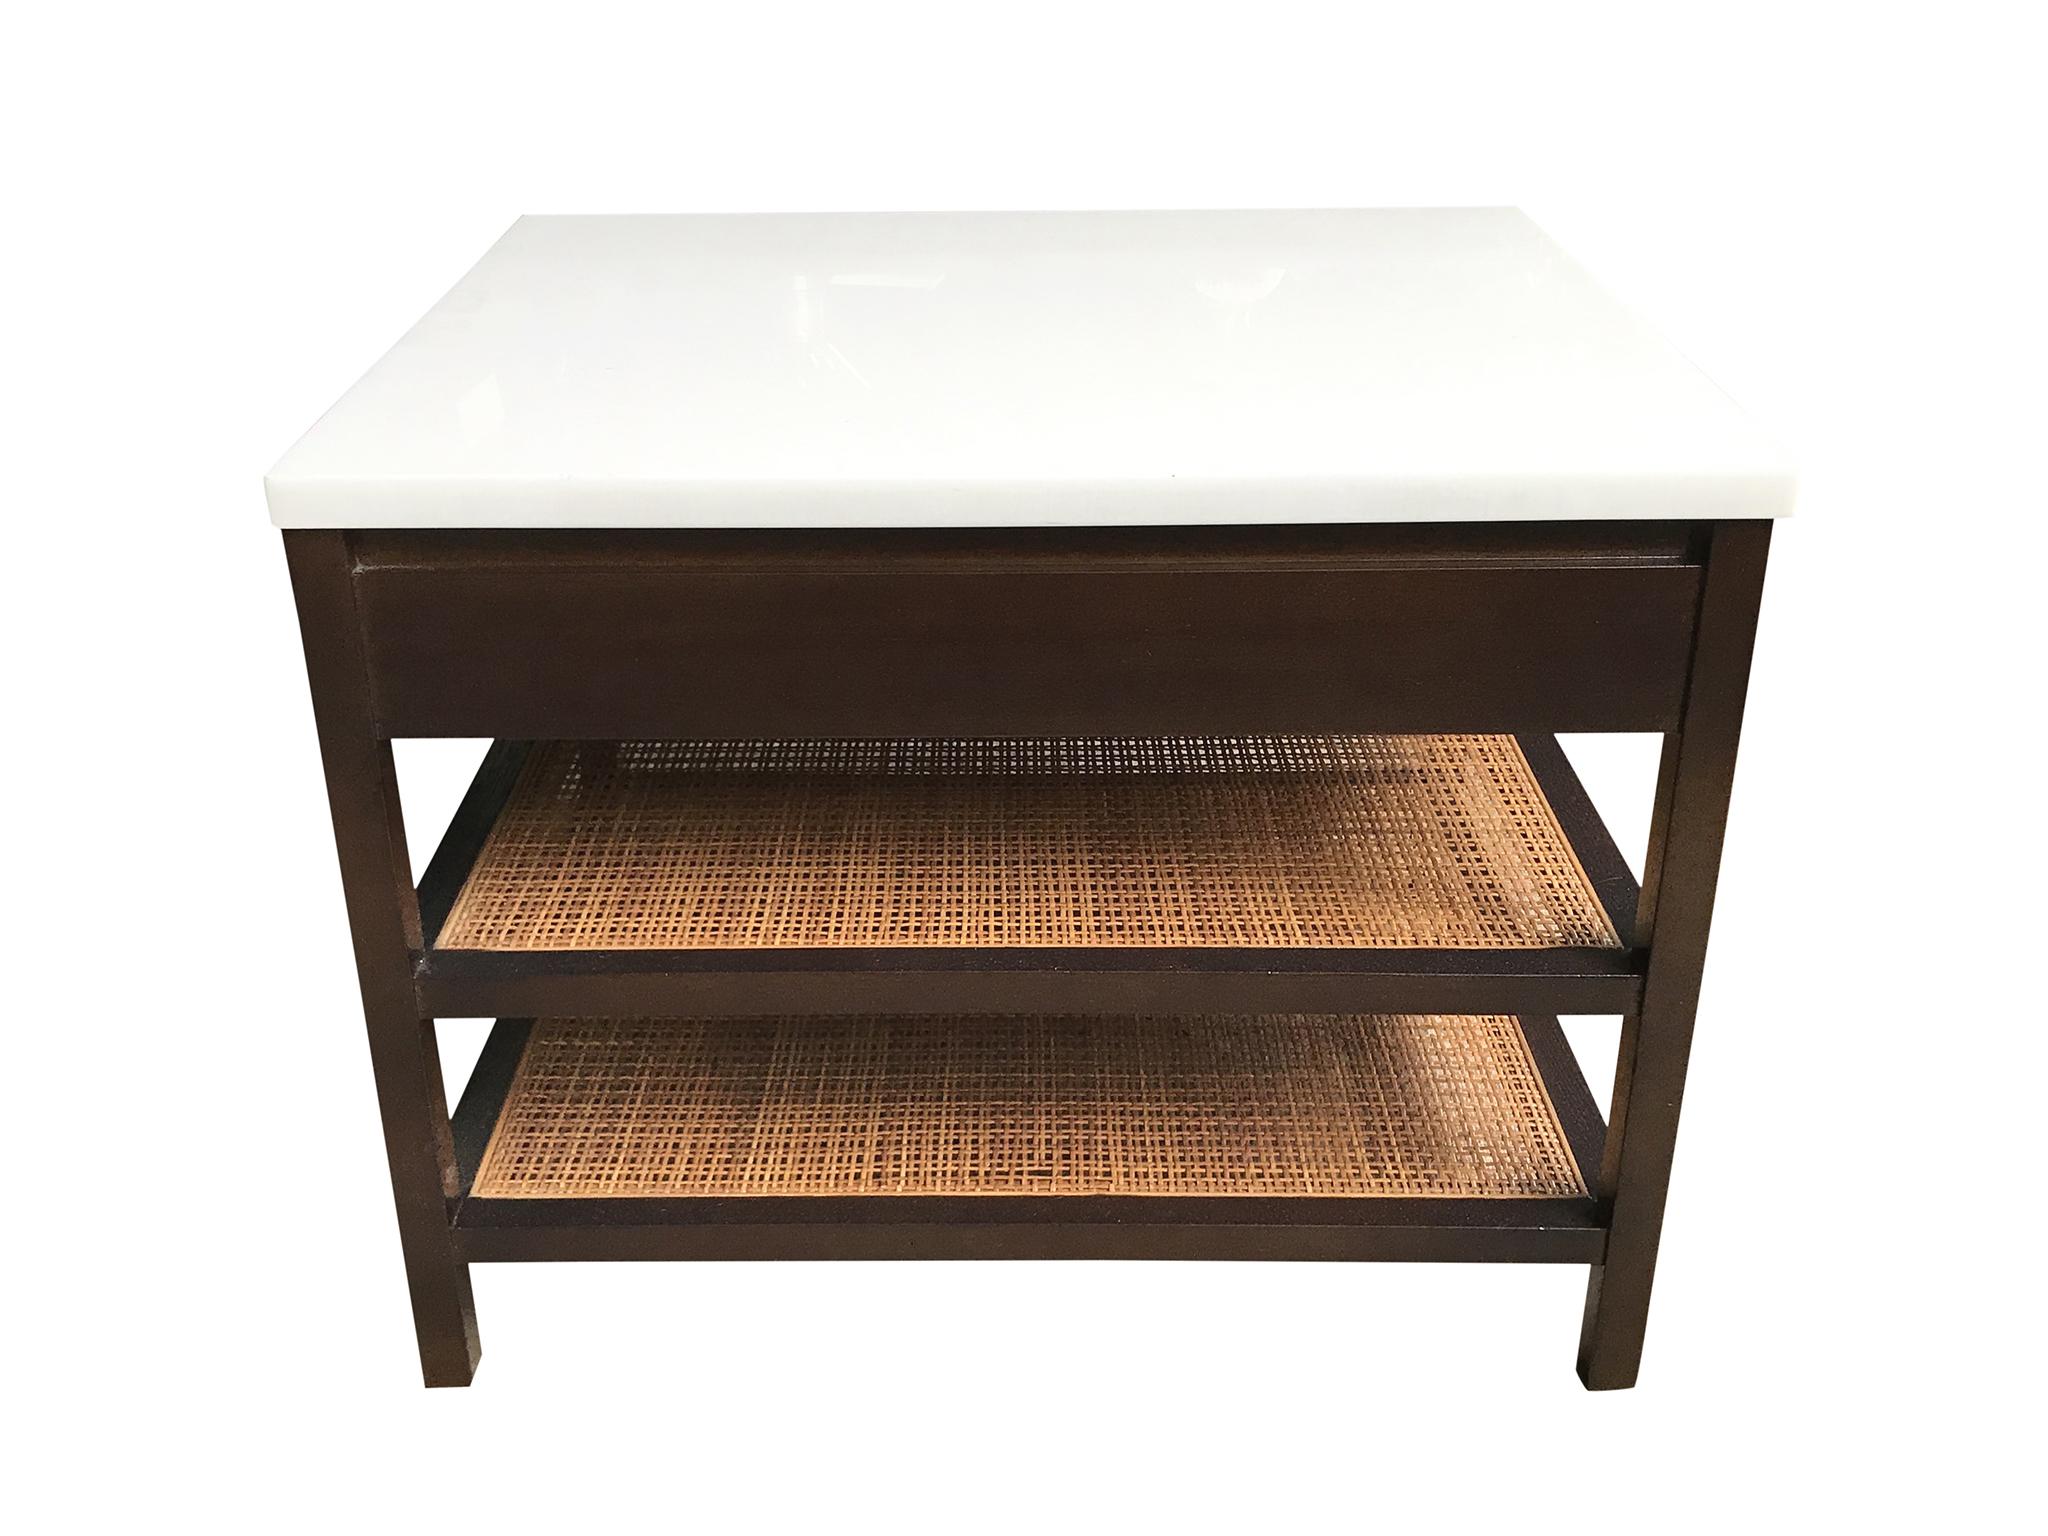 American Midcentury Paul McCobb Nightstand Table for the Calvin Group